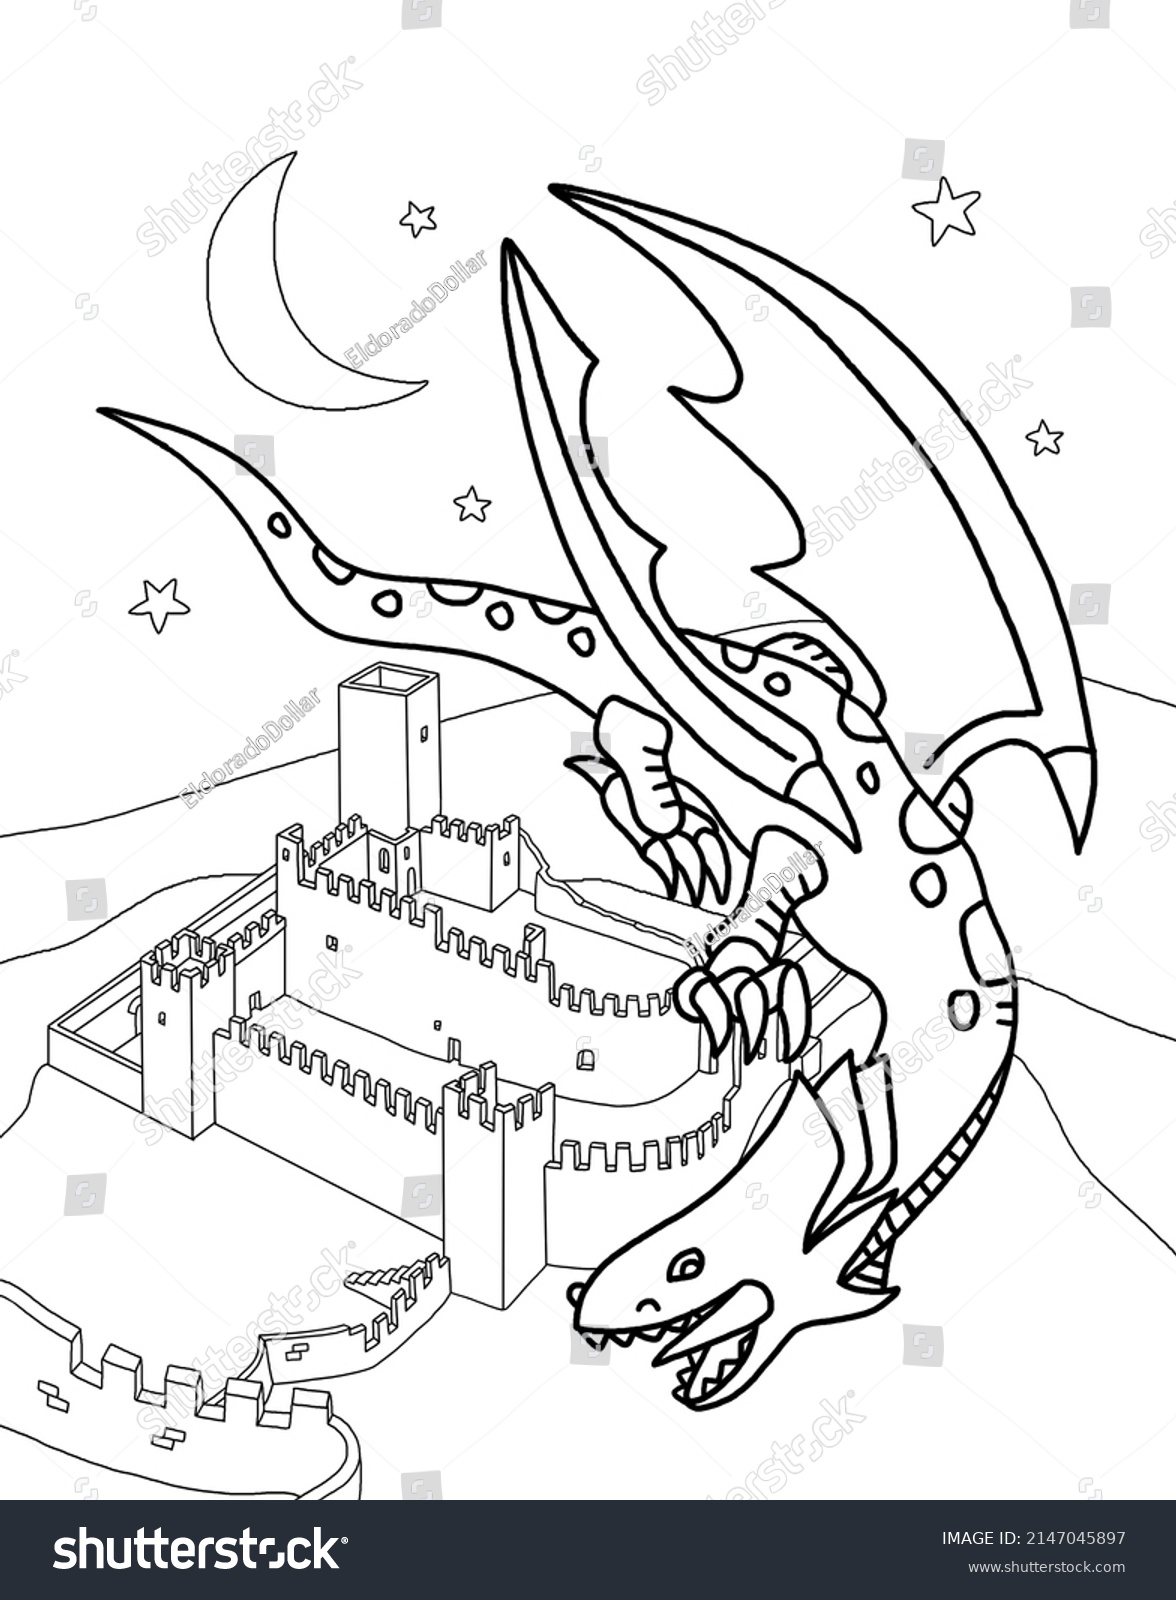 Colouring Book Dragon Coloring Page Kid Stock Illustration 2147045897